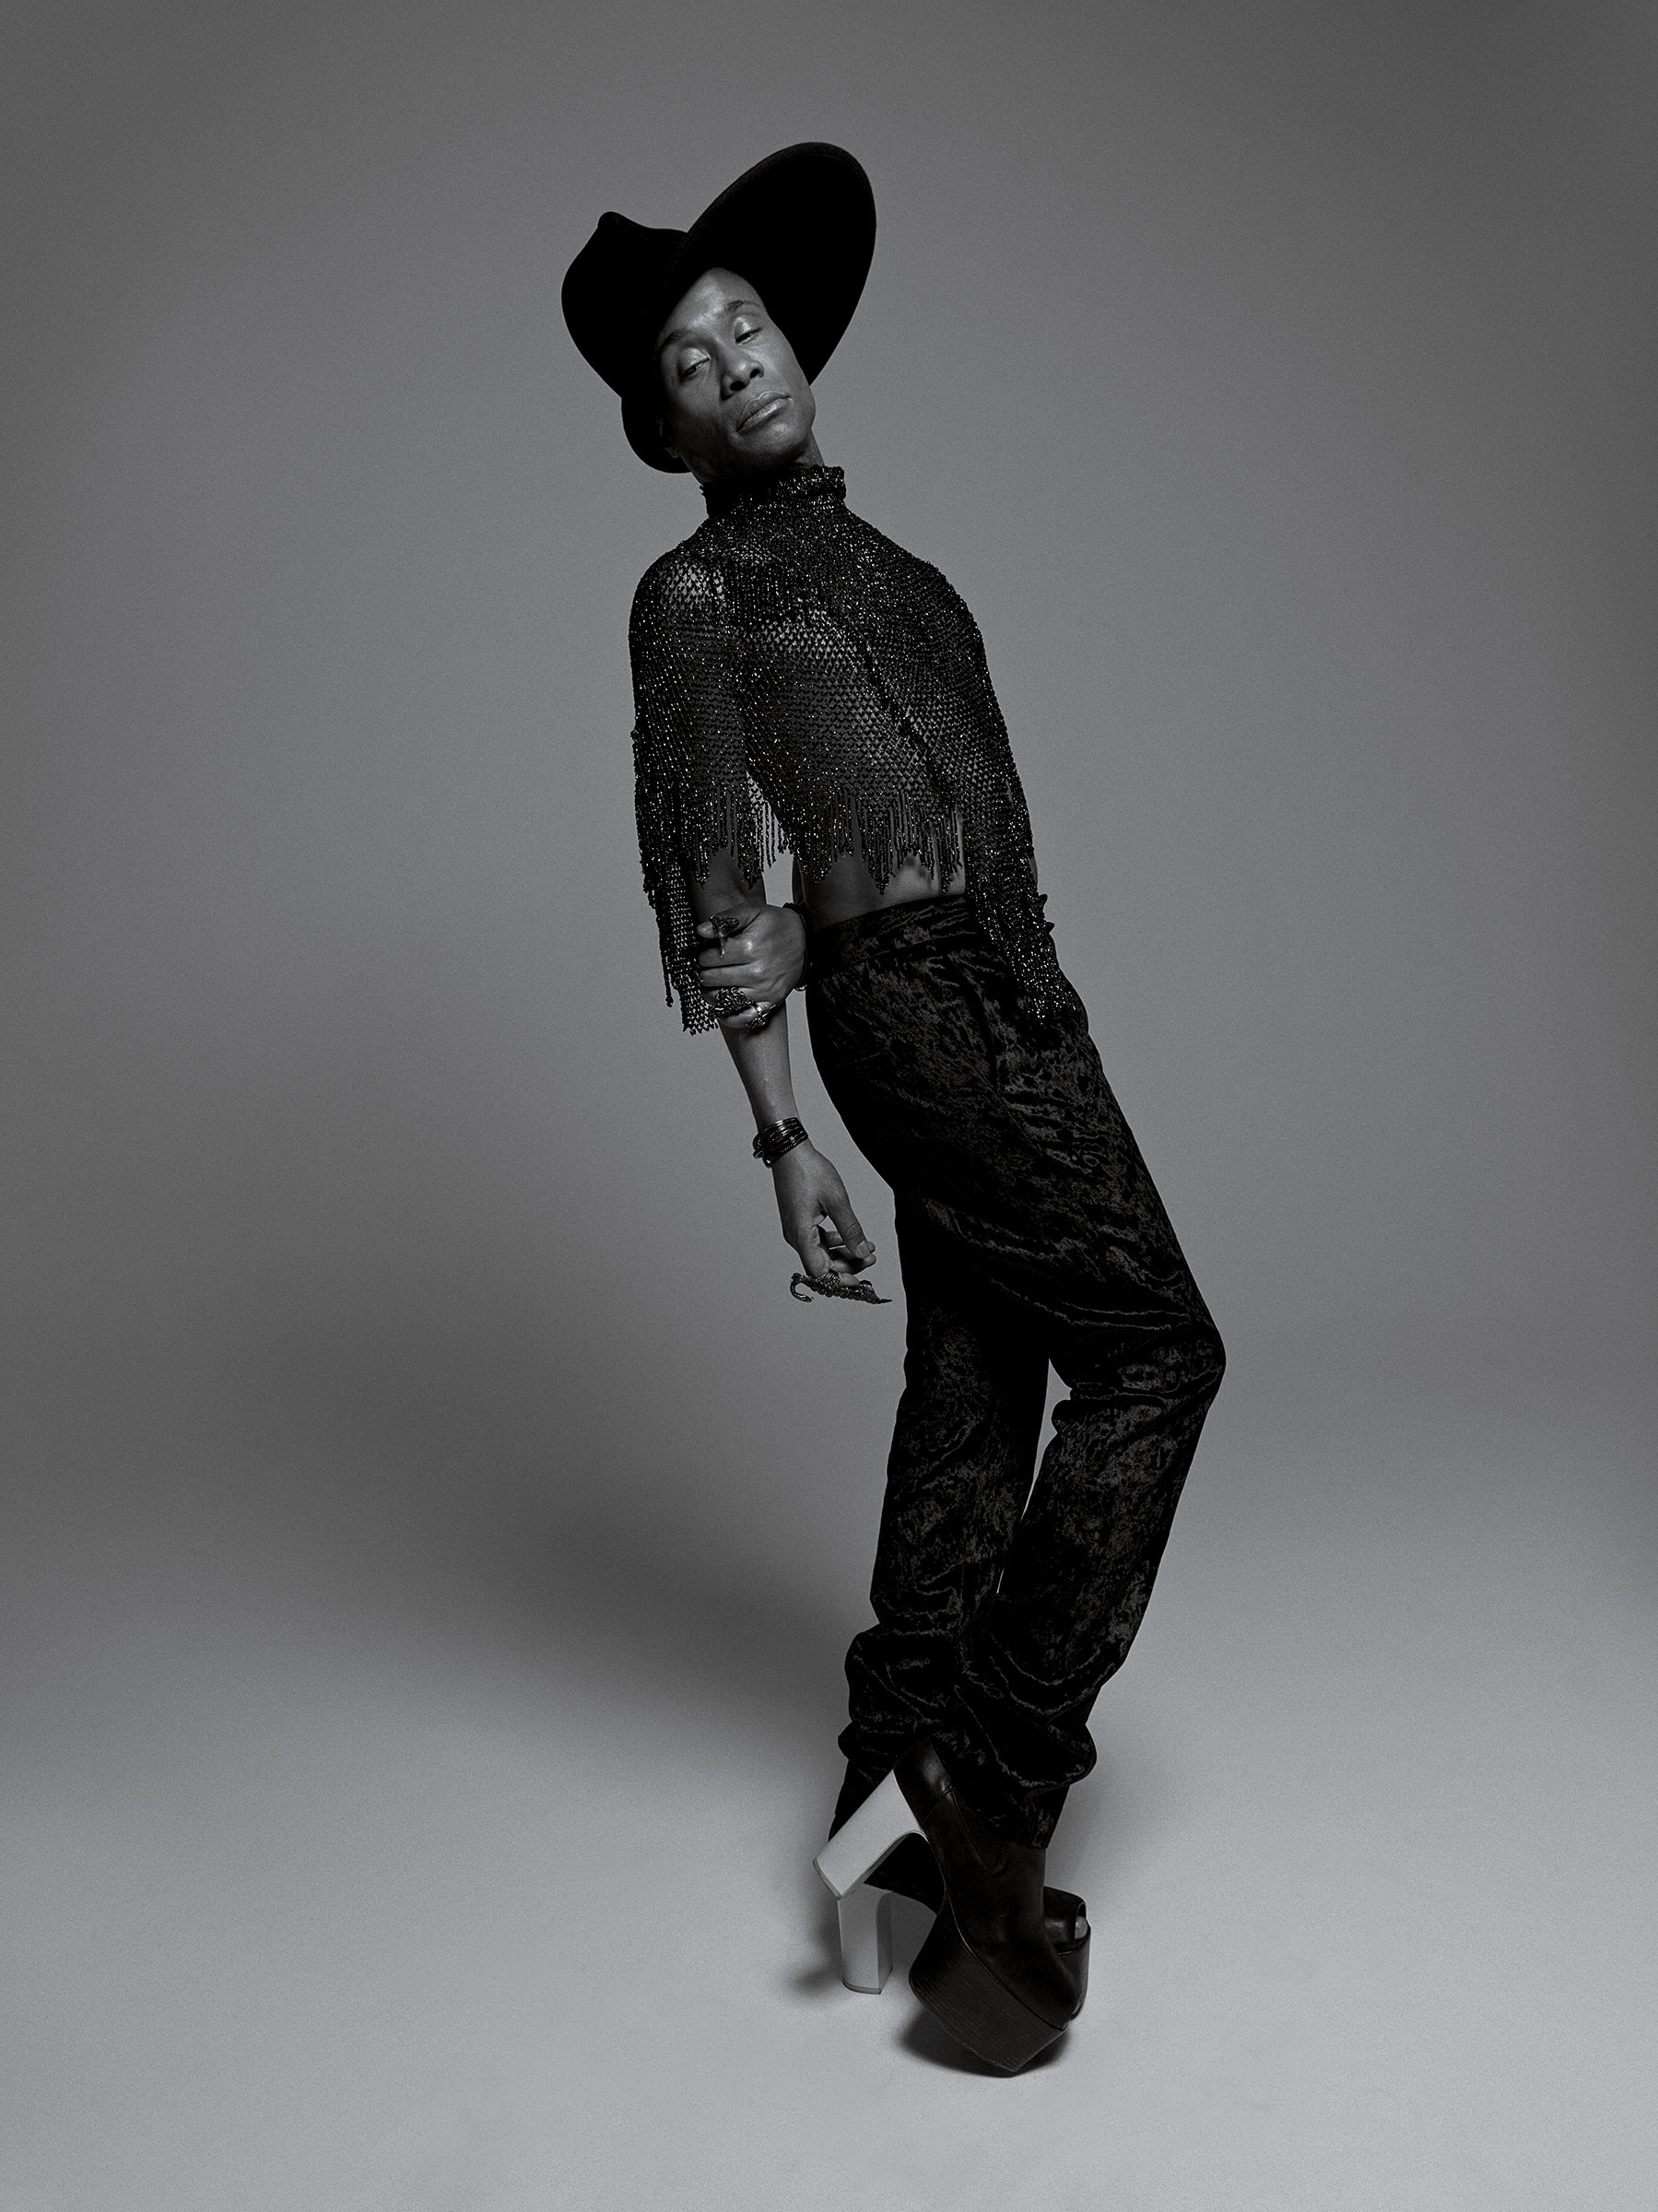 <strong>Billy Porter</strong>. "<a href="https://time.com/collection/100-most-influential-people-2020/5888234/billy-porter/">TIME 100 Most Influential People</a>," Oct. 5 issue. (Paola Kudacki for TIME)